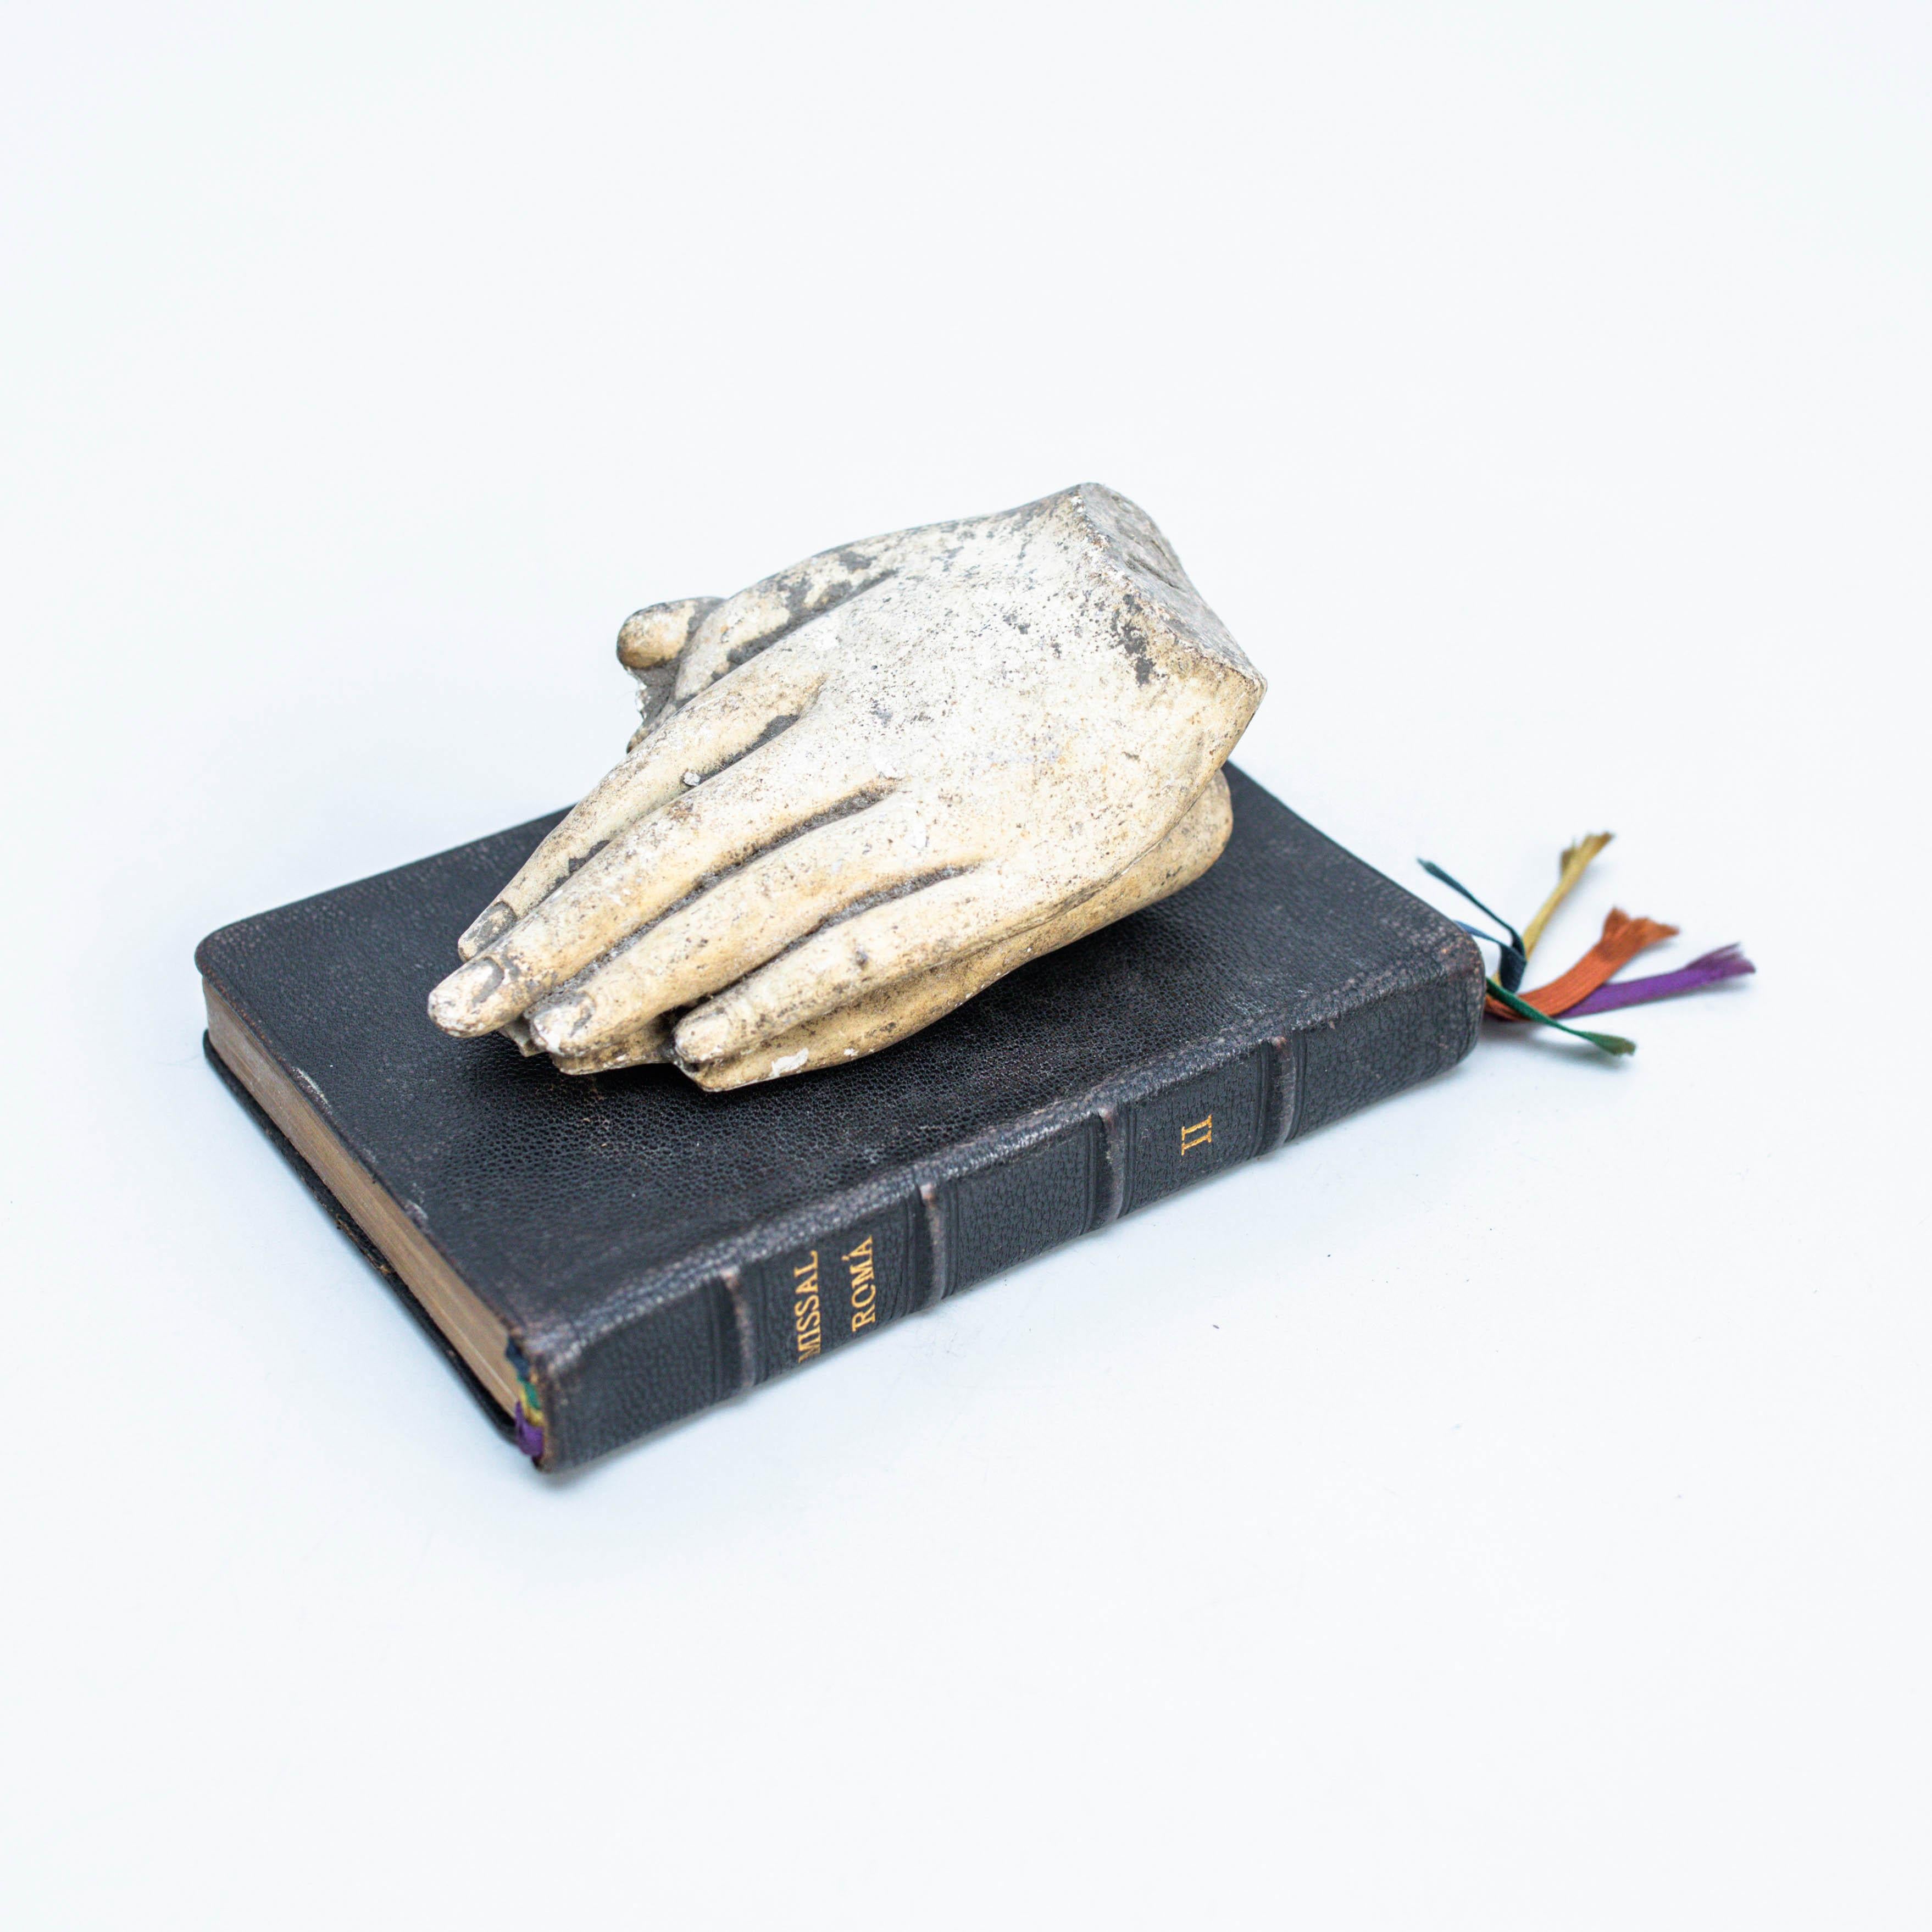 Artwork with old book and mysterious praying hands.

Made by unknown artist in Spain, circa 1990.

In original condition, with minor wear consistent with age and use, preserving a beautiful patina. 

Measures:
H 8.5cm
W 15.5cm
D 11cm.